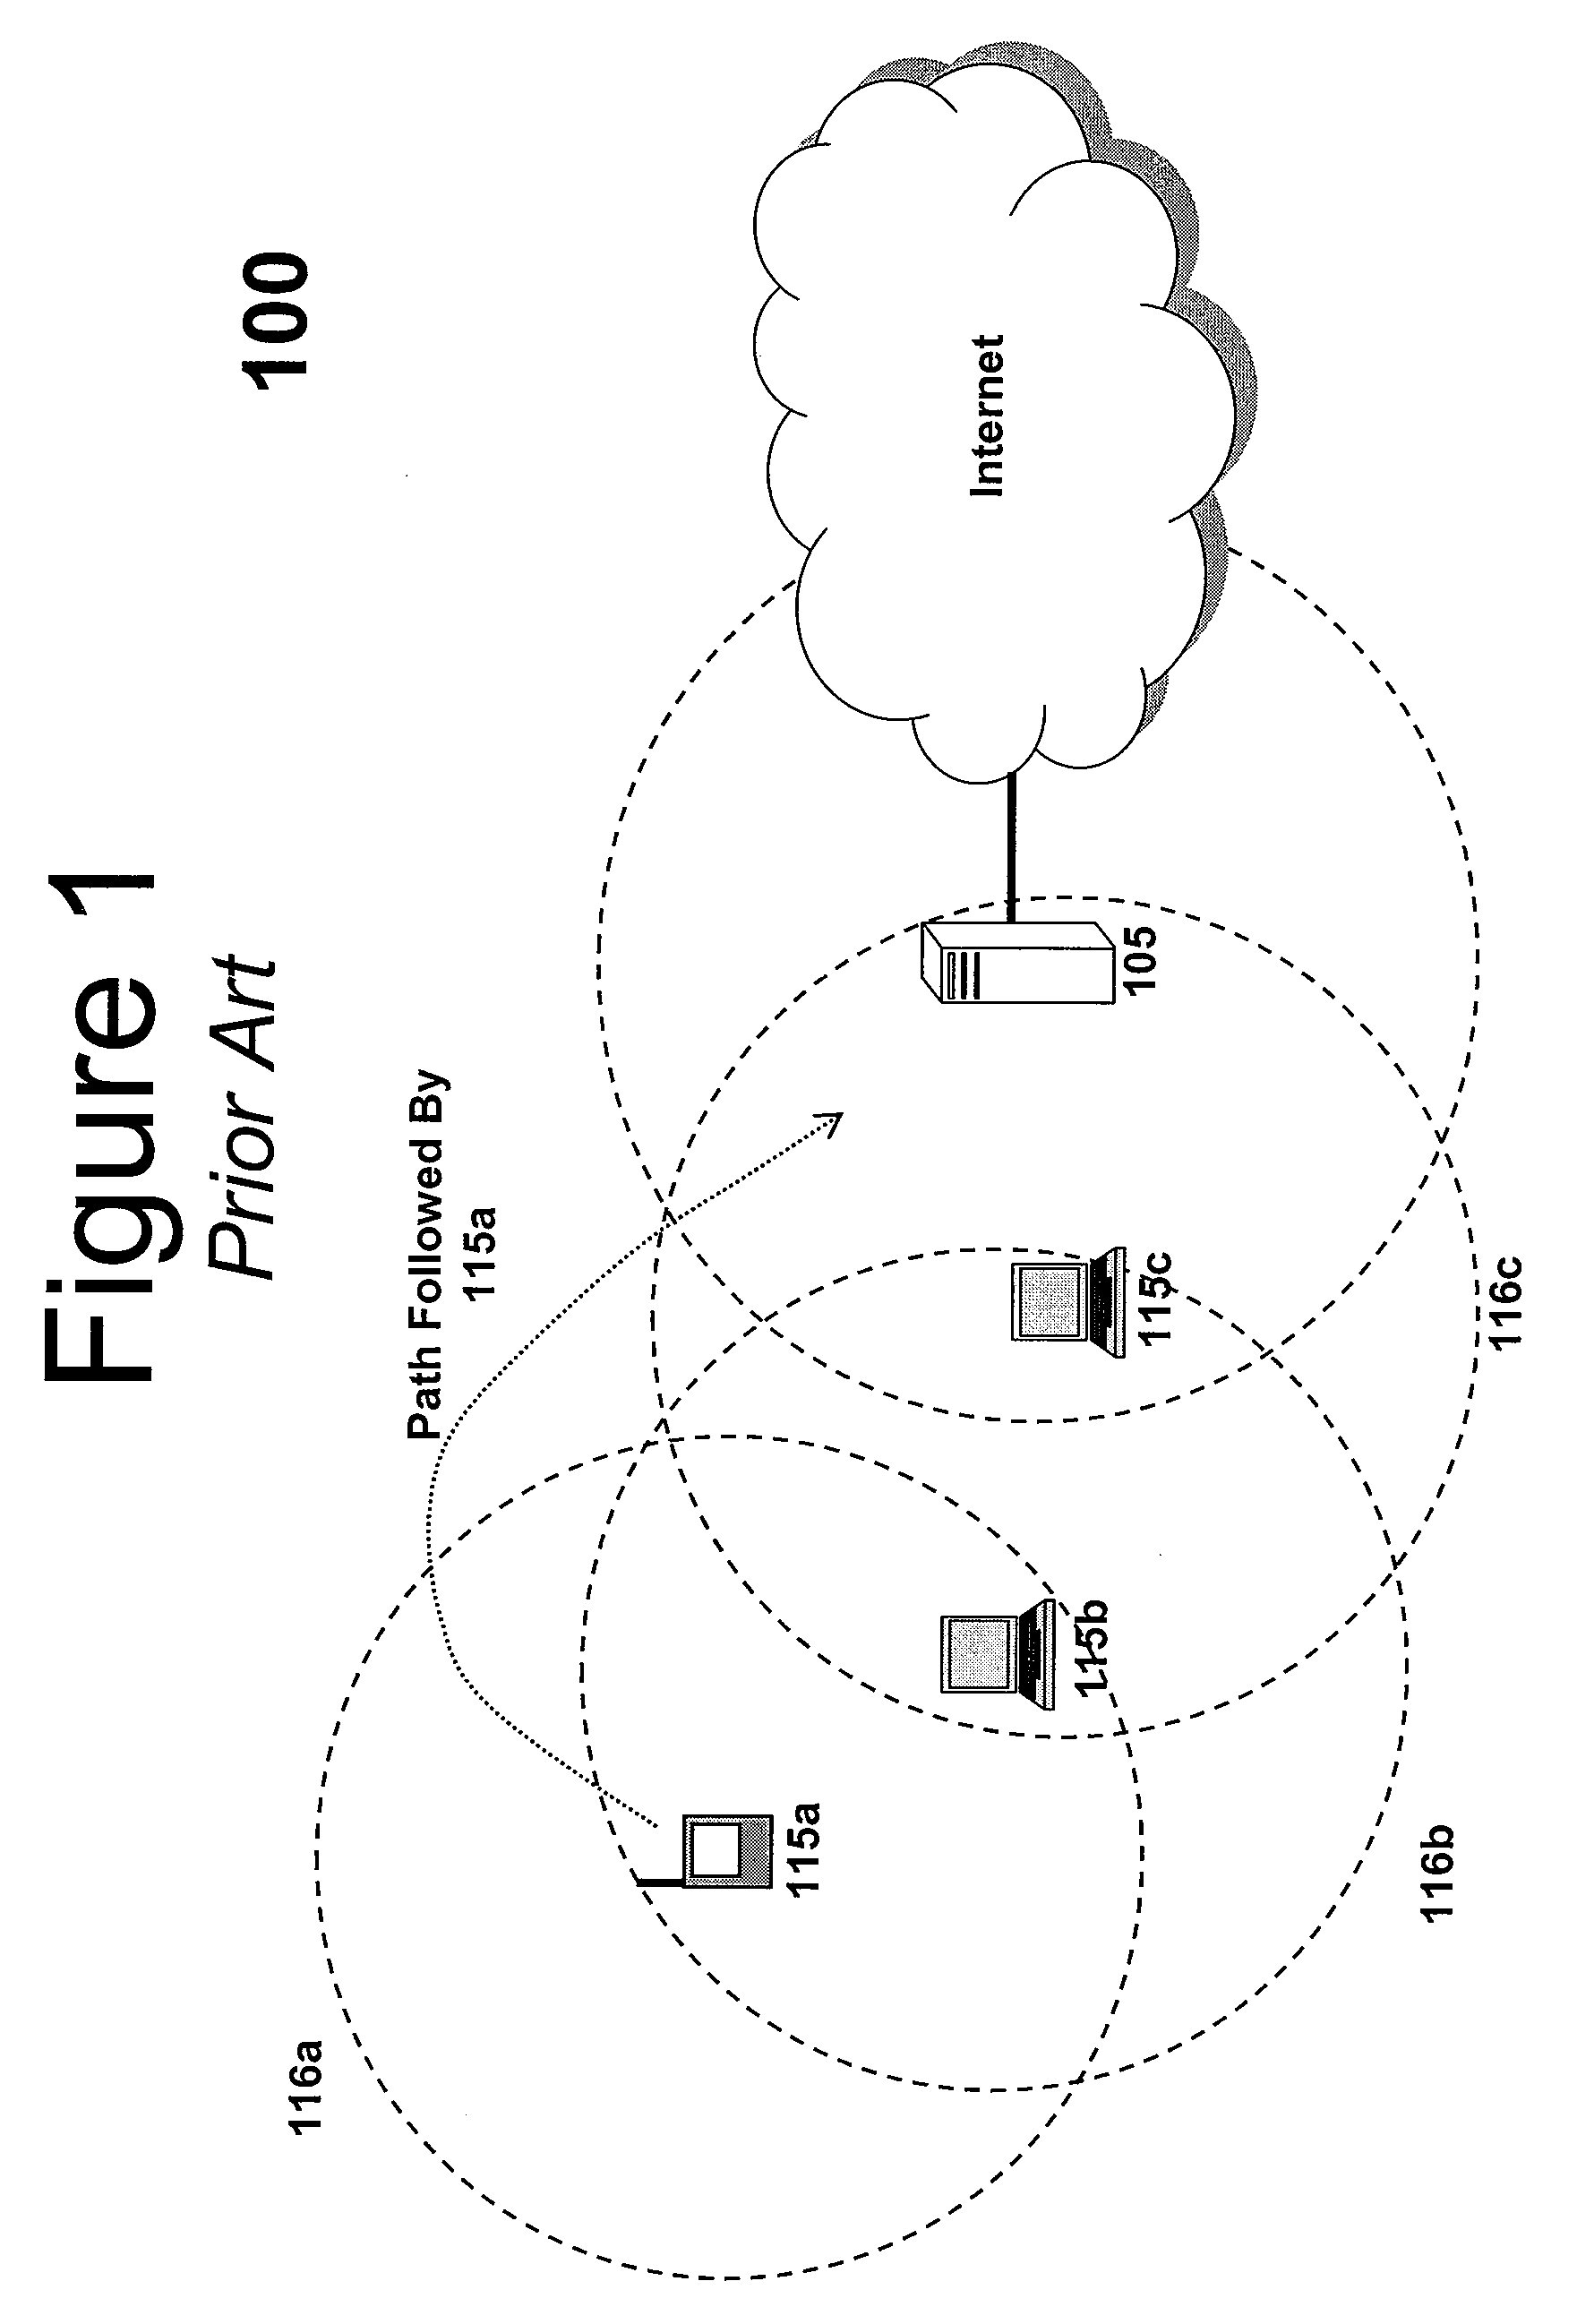 Quality of service aware routing over mobile ad hoc networks (manets)